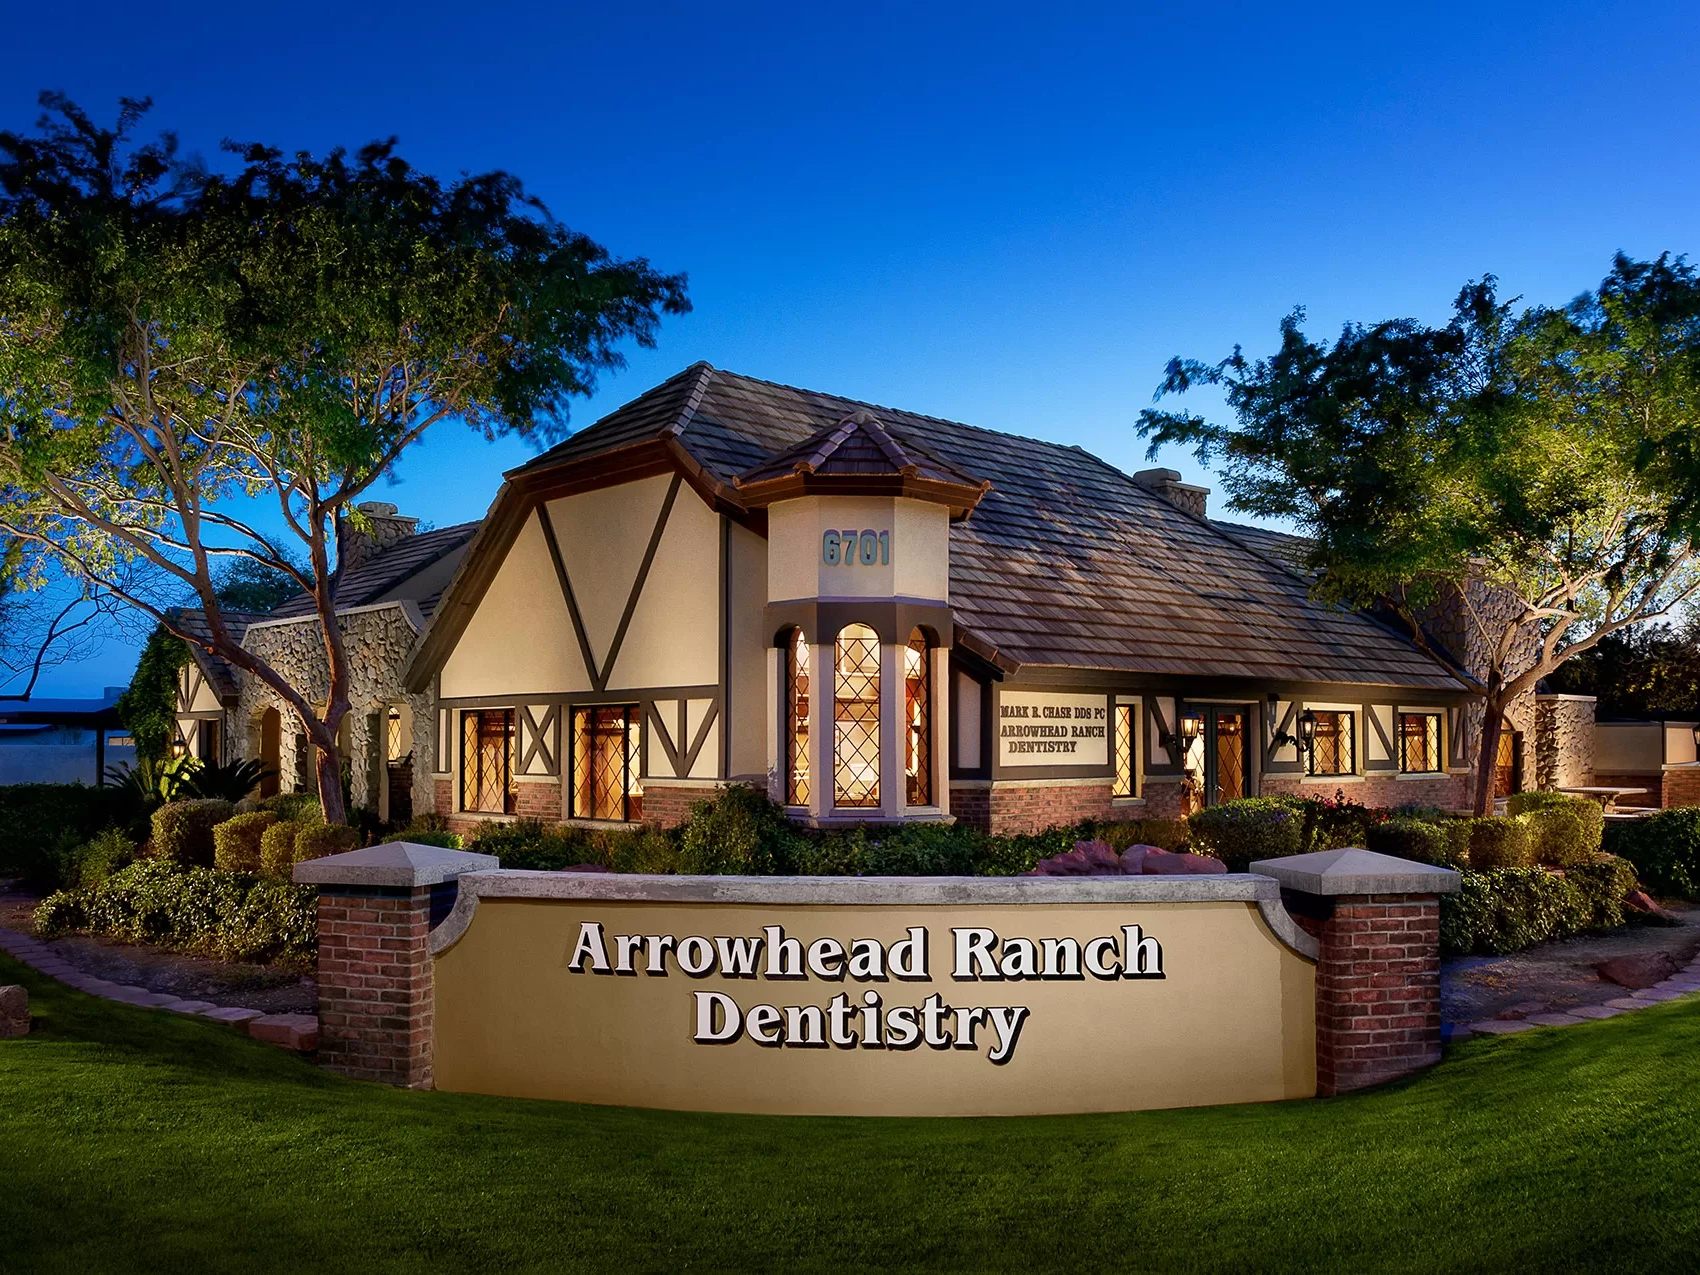 Arrowhead Ranch Dentistry is the best dentist in Glendale, AZ that provides full-service general and cosmetic dentistry Glendale